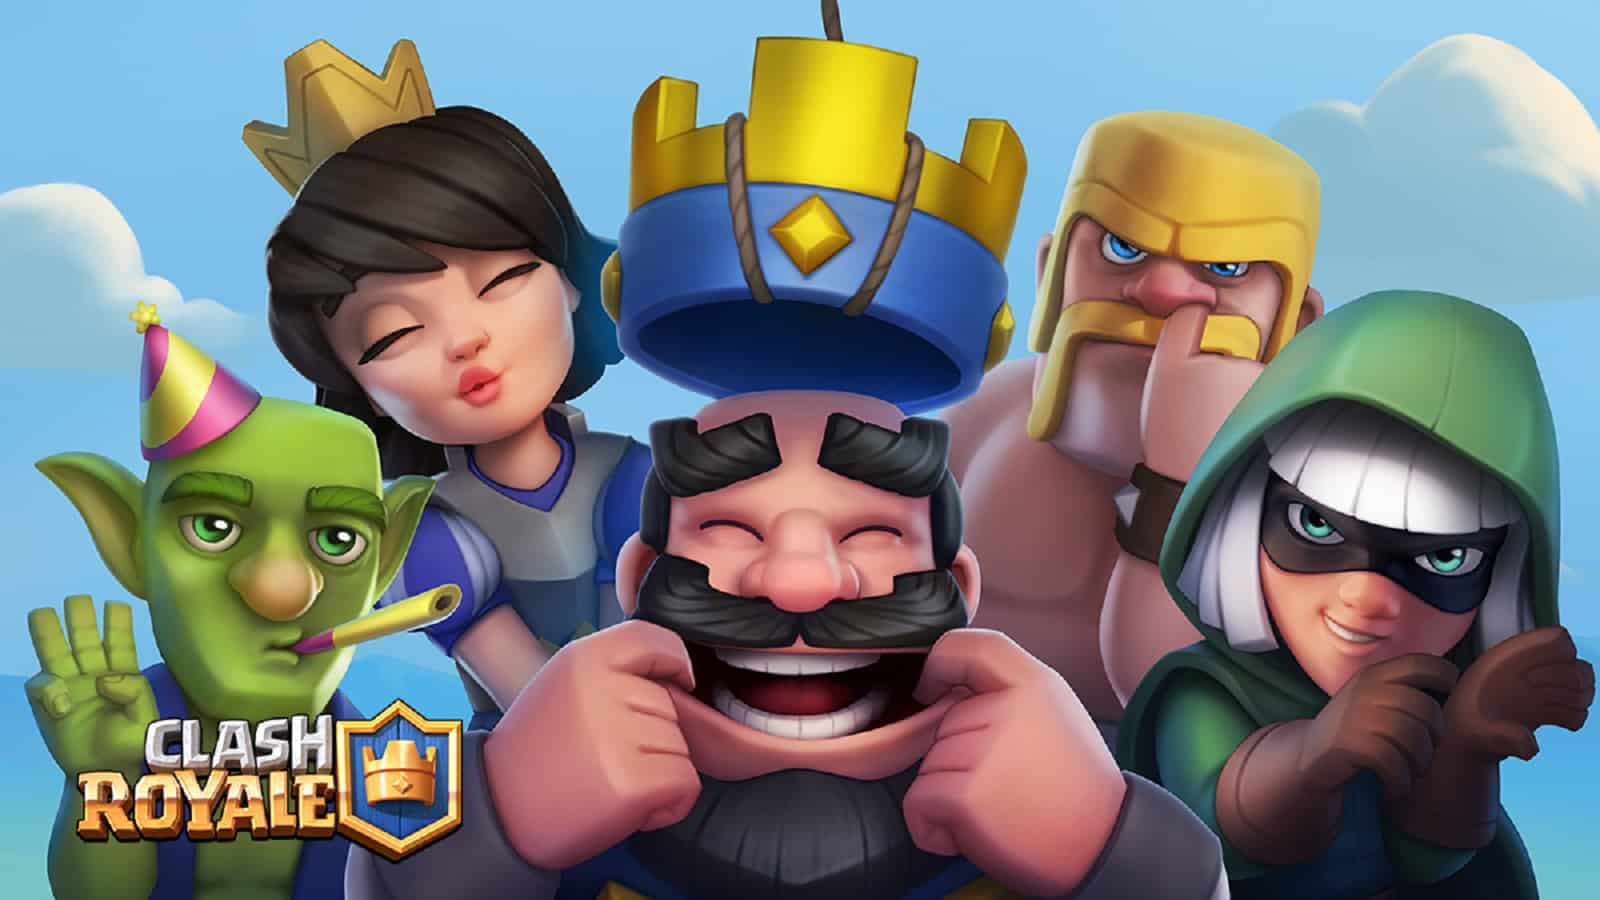 Best Clash Royale Decks Arena 4 - 7: 5 Good Decks And Strategy For Winning  Trophies After Latest Update